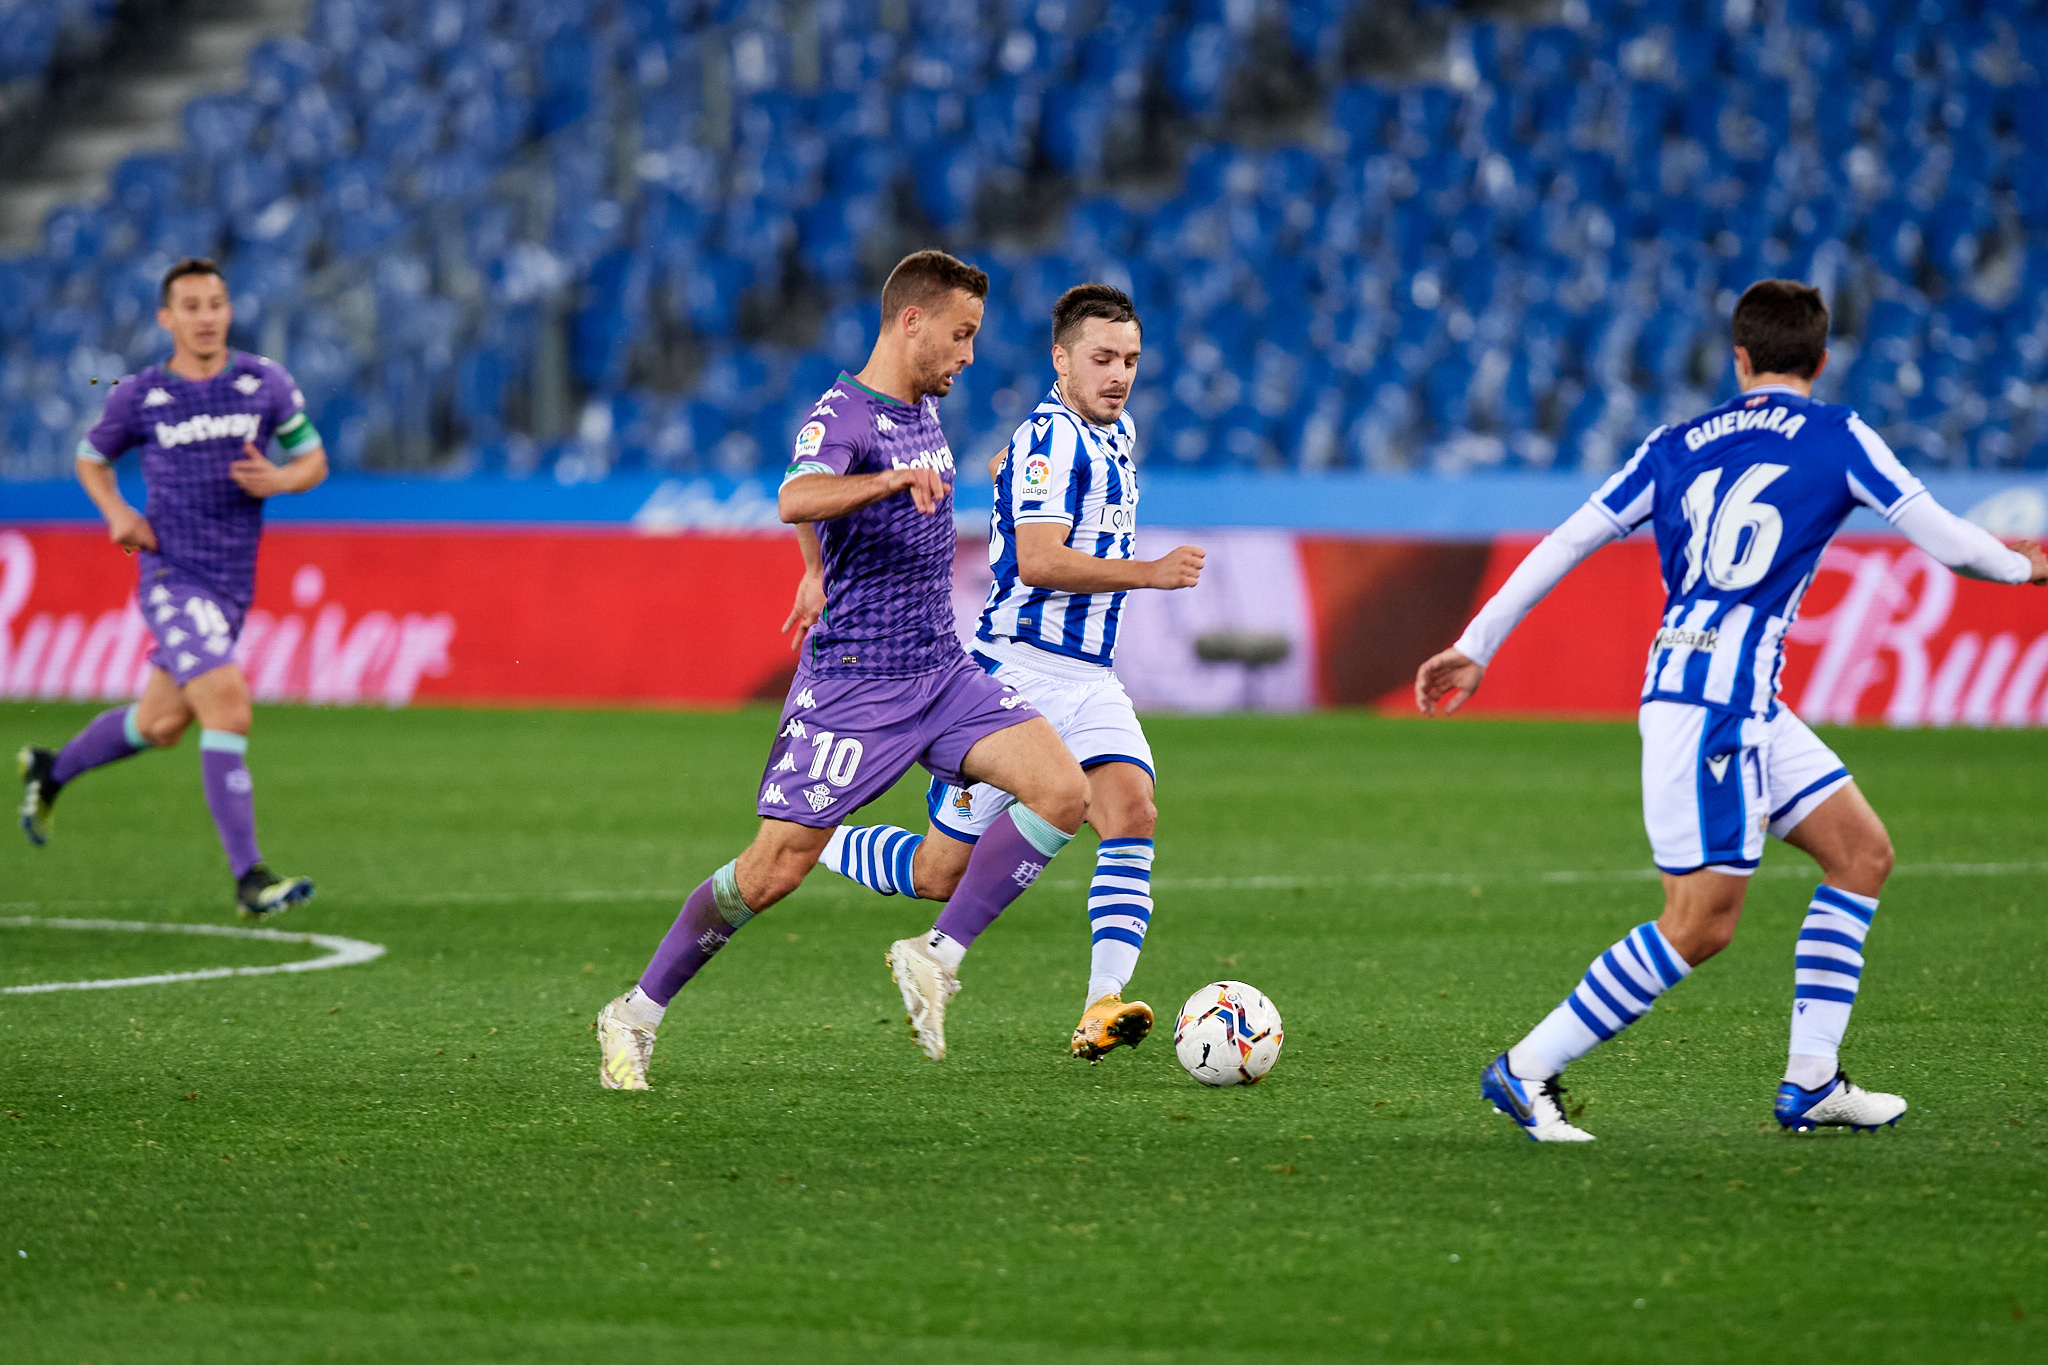 Real Betis mount late comeback to earn point at Real Sociedad